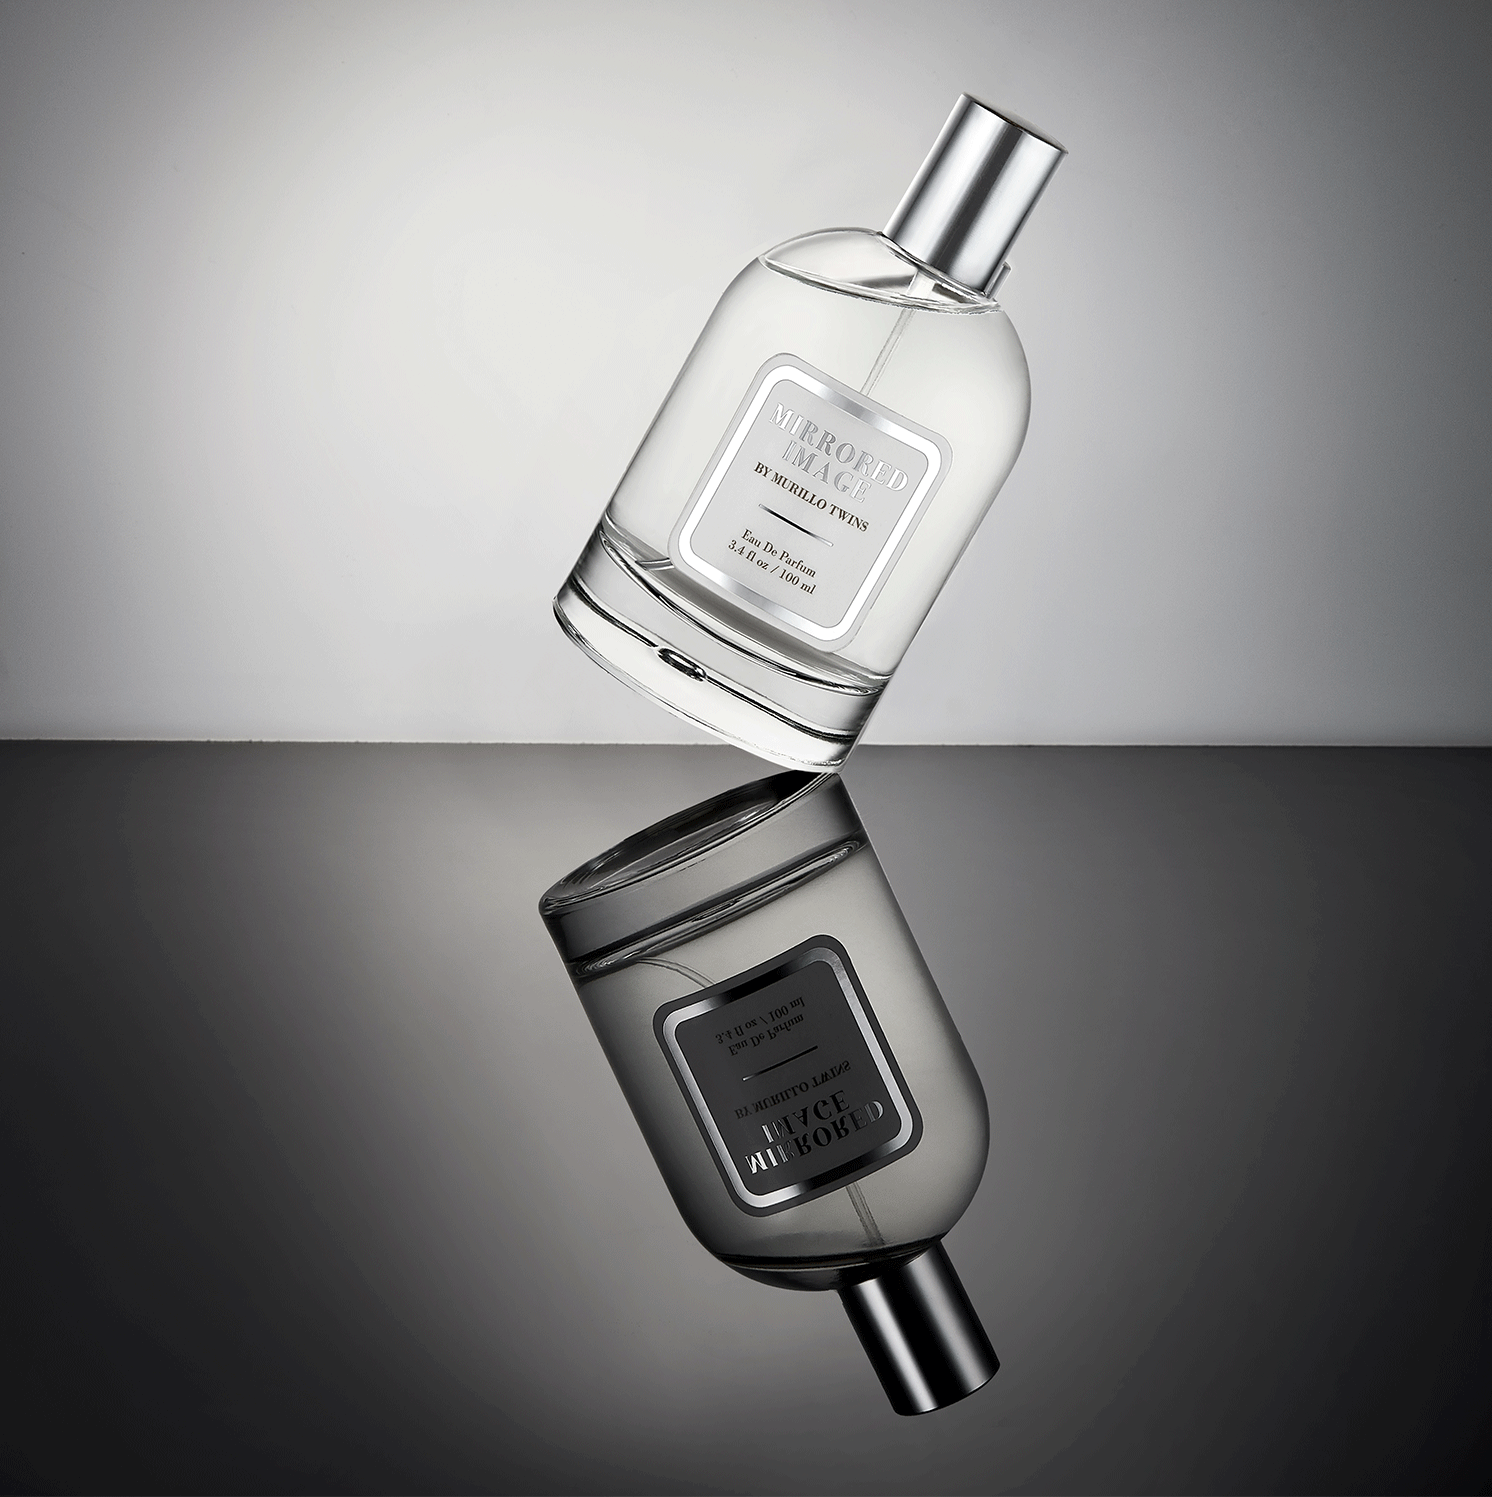 Mirrored Image, the best-selling perfume created by celebrities Brittany and Briana Murillo, tiled on its side.